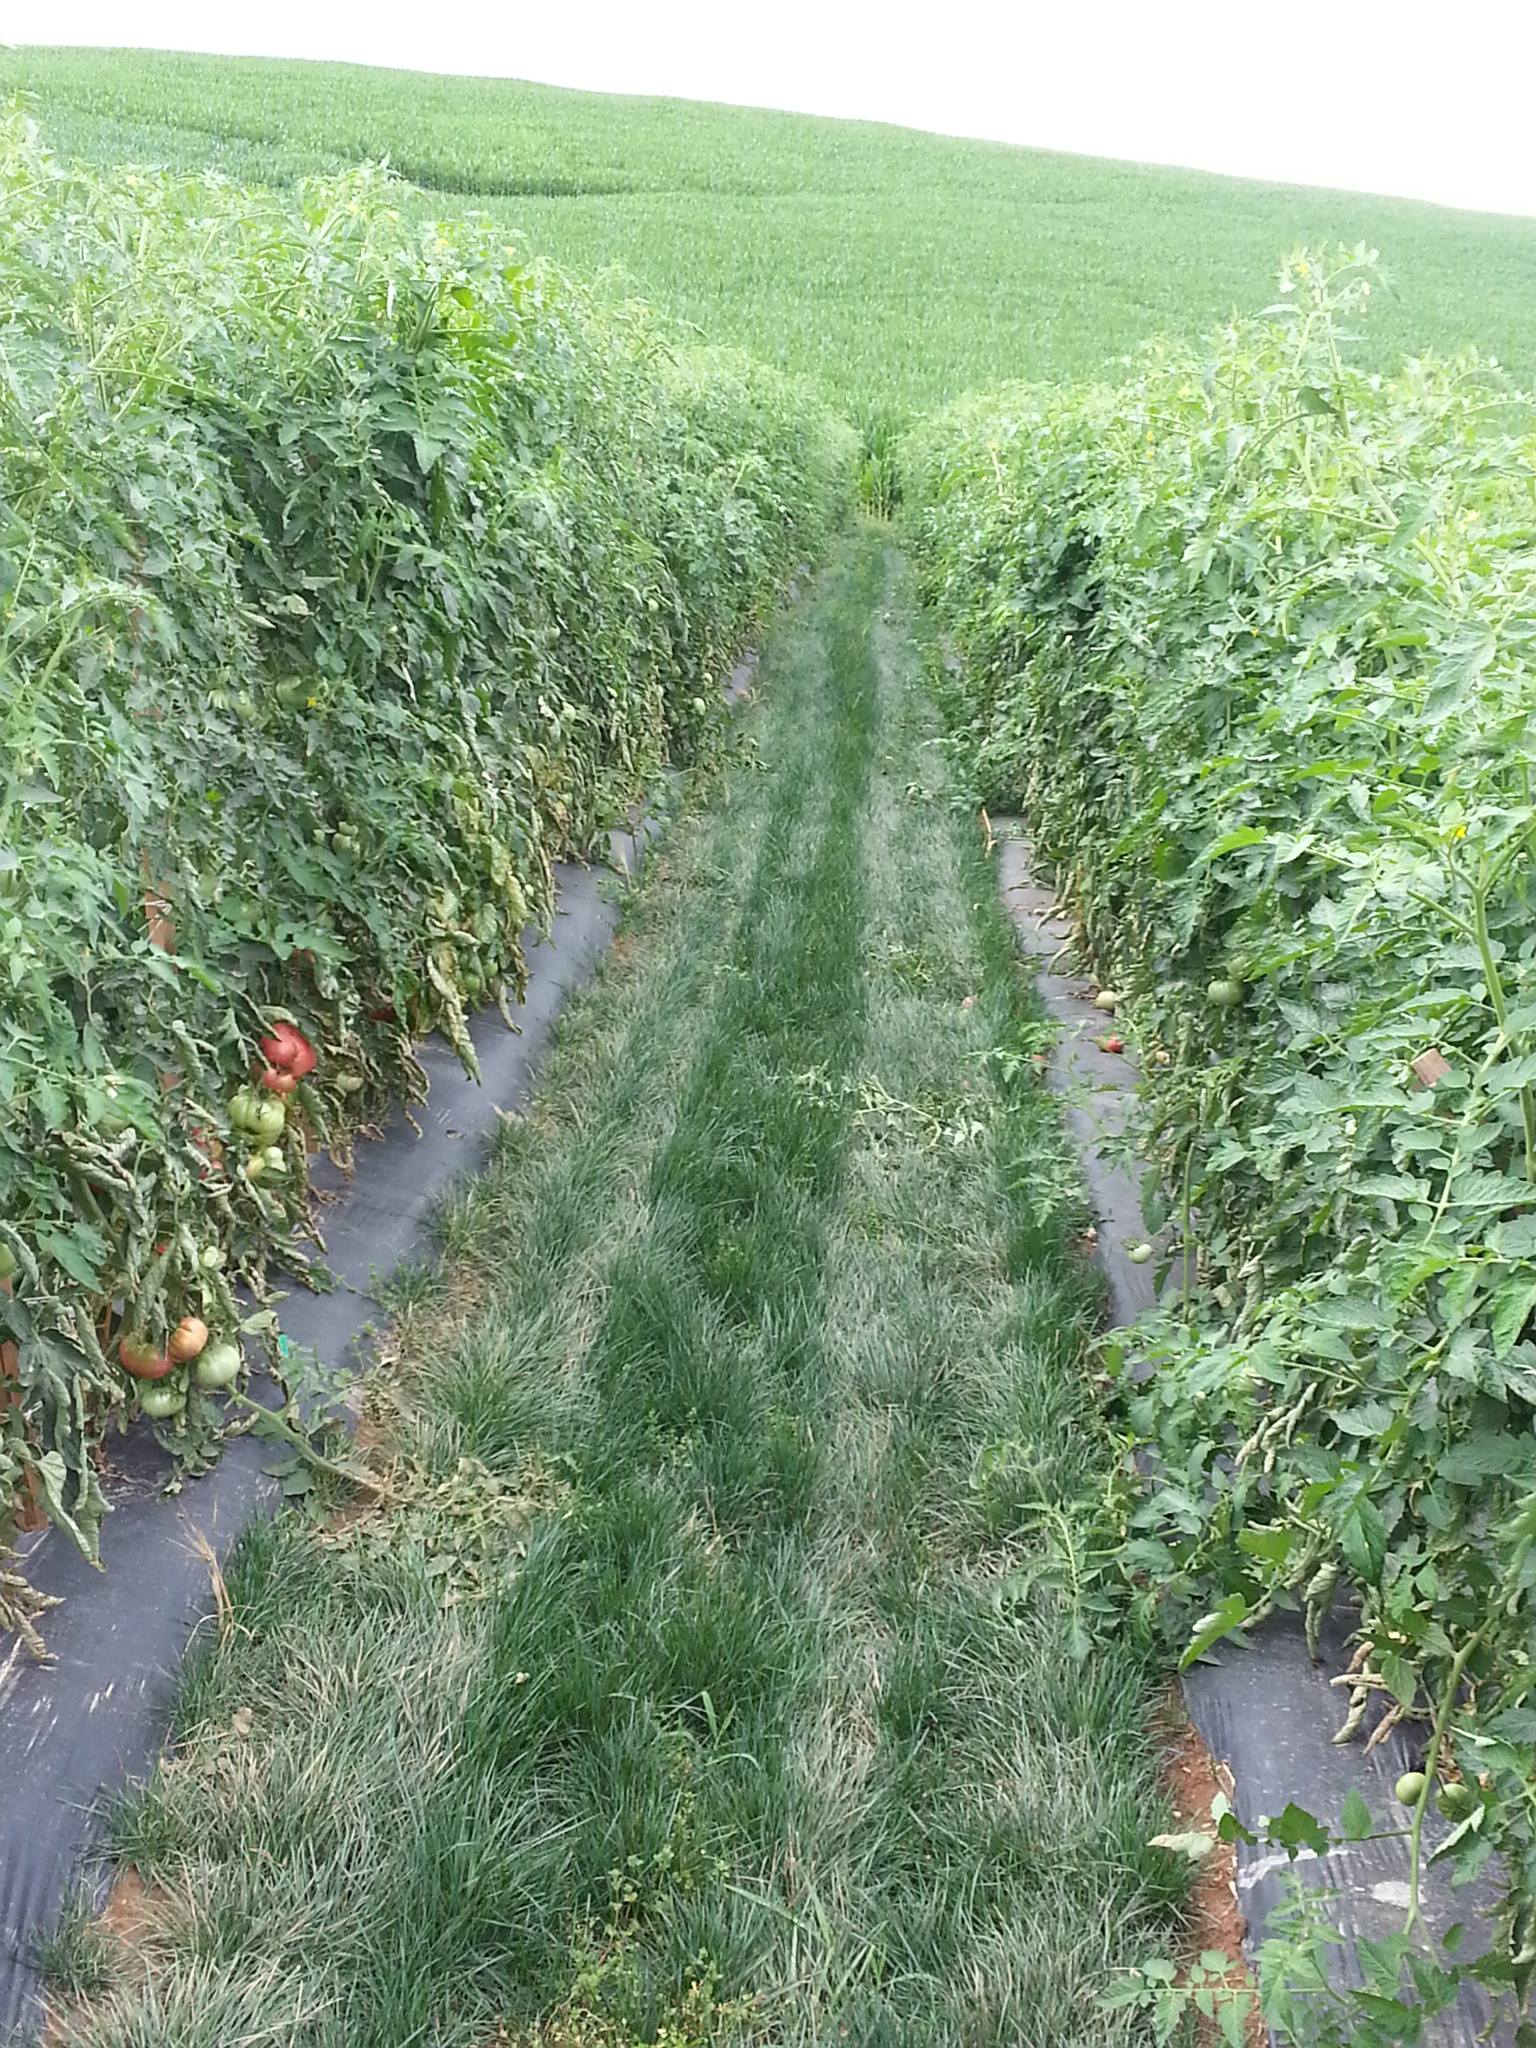 Intensively managed tomatoes and cover cropping to prevent erosion